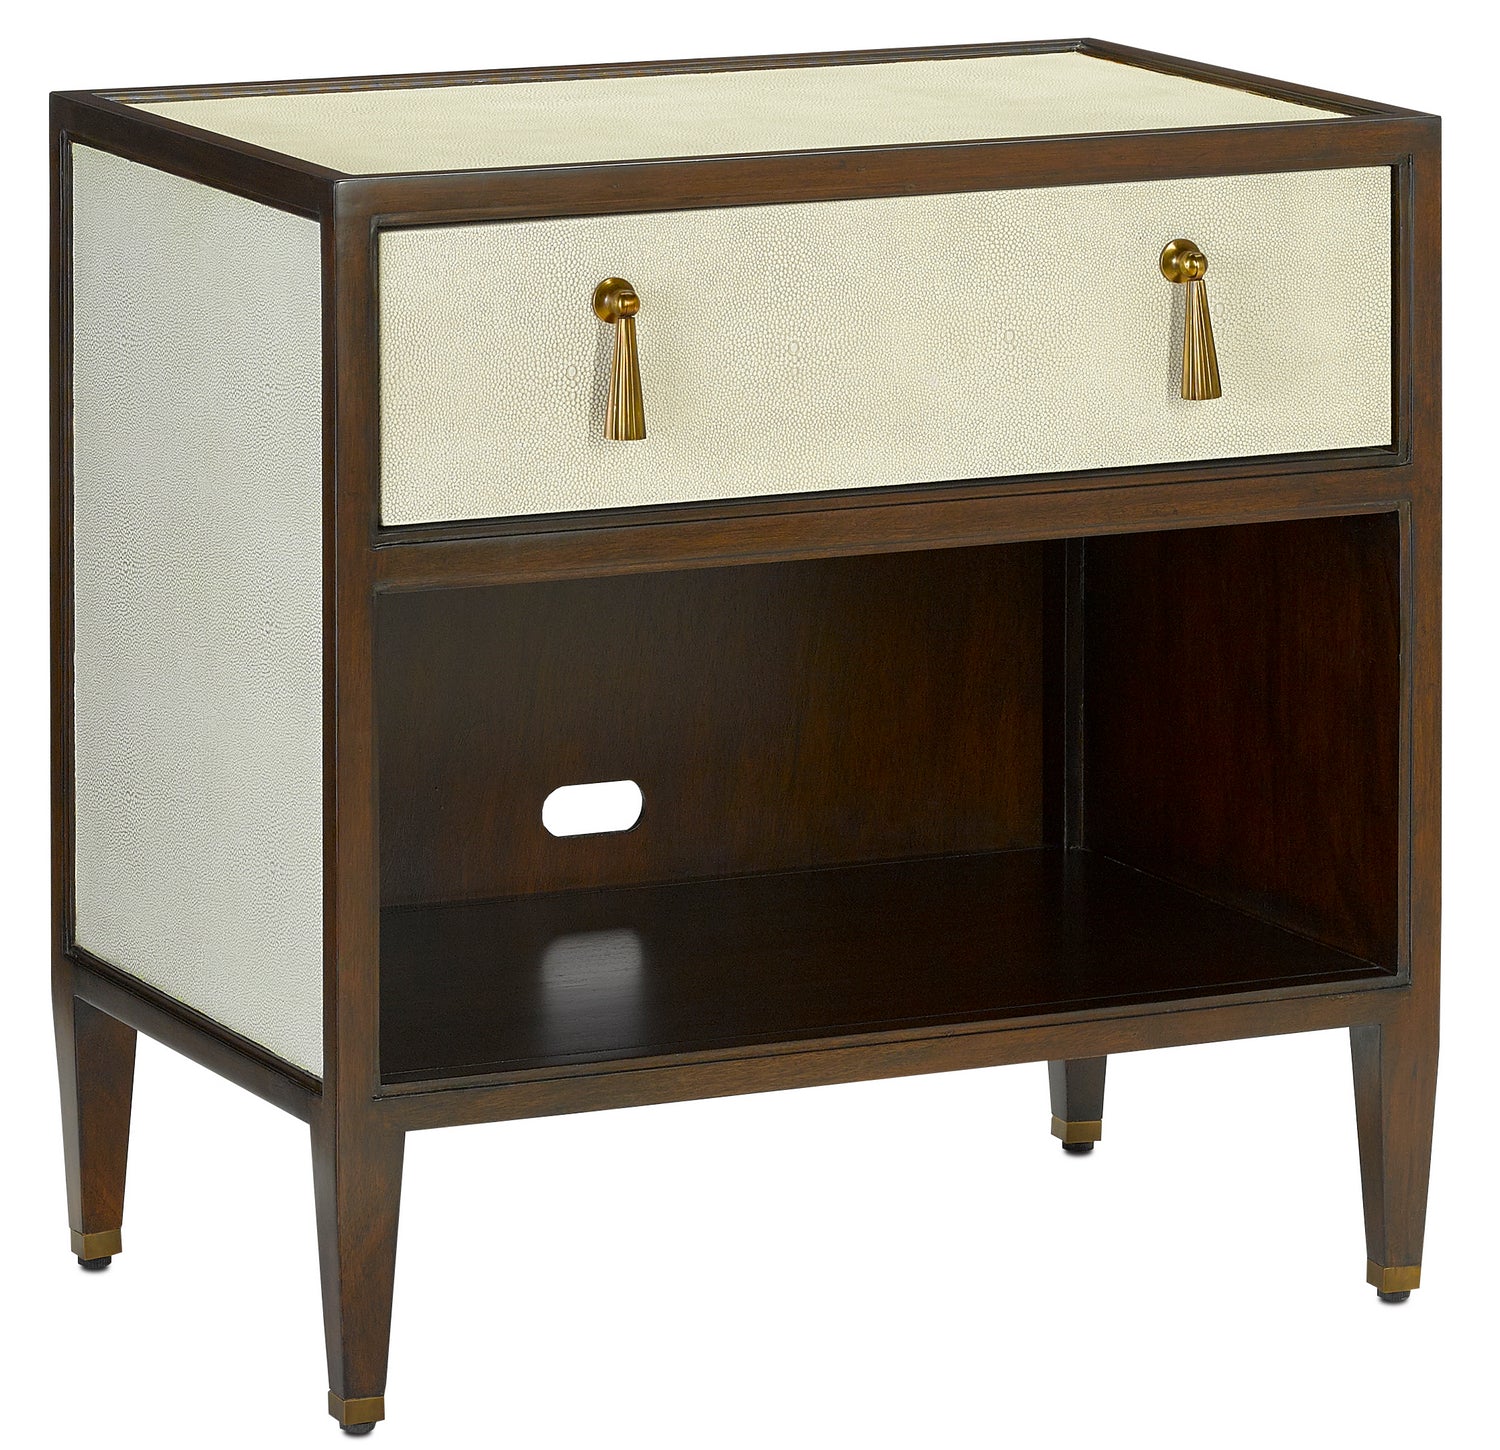 Nightstand from the Evie collection in Ivory/Dark Walnut/Brass finish